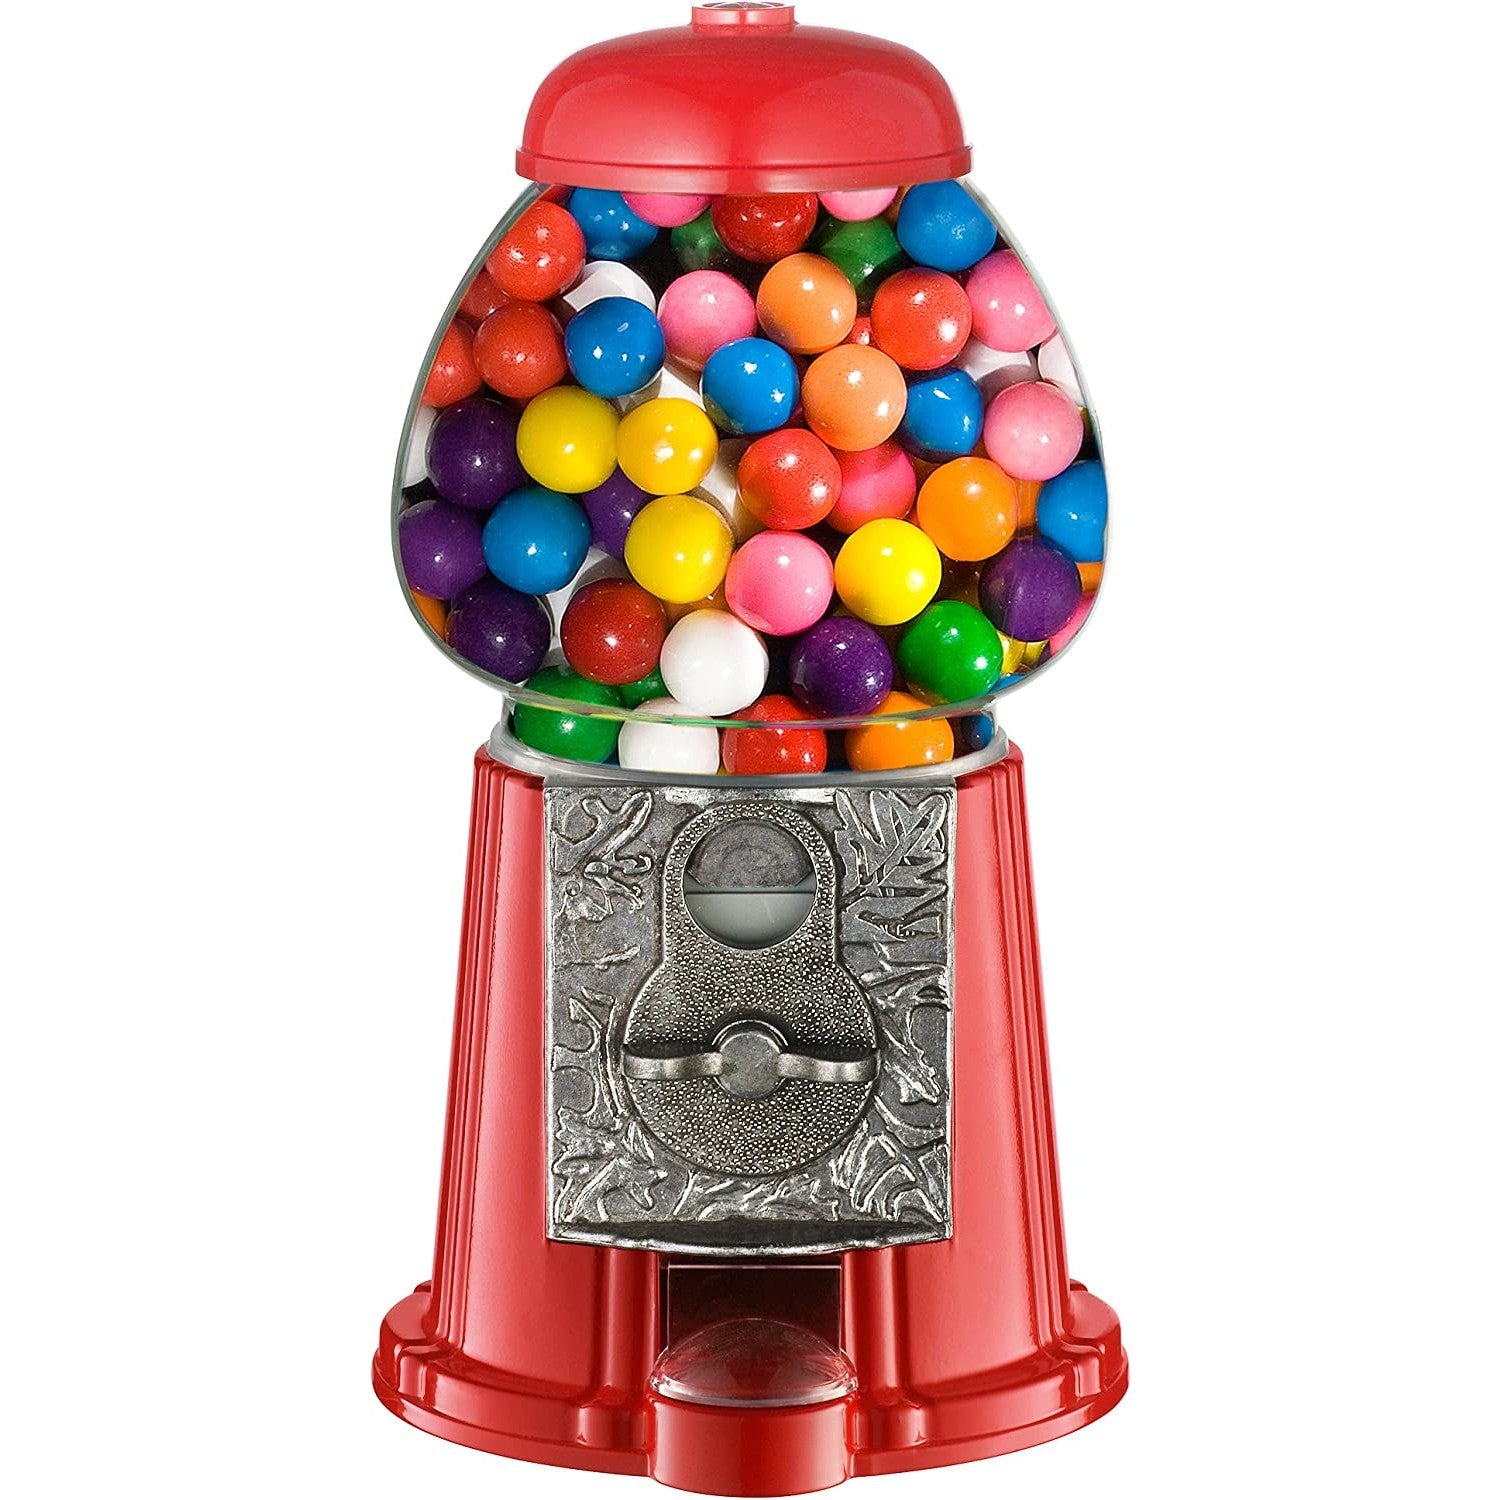 Get your candy fix and more with this old fashioned gumball